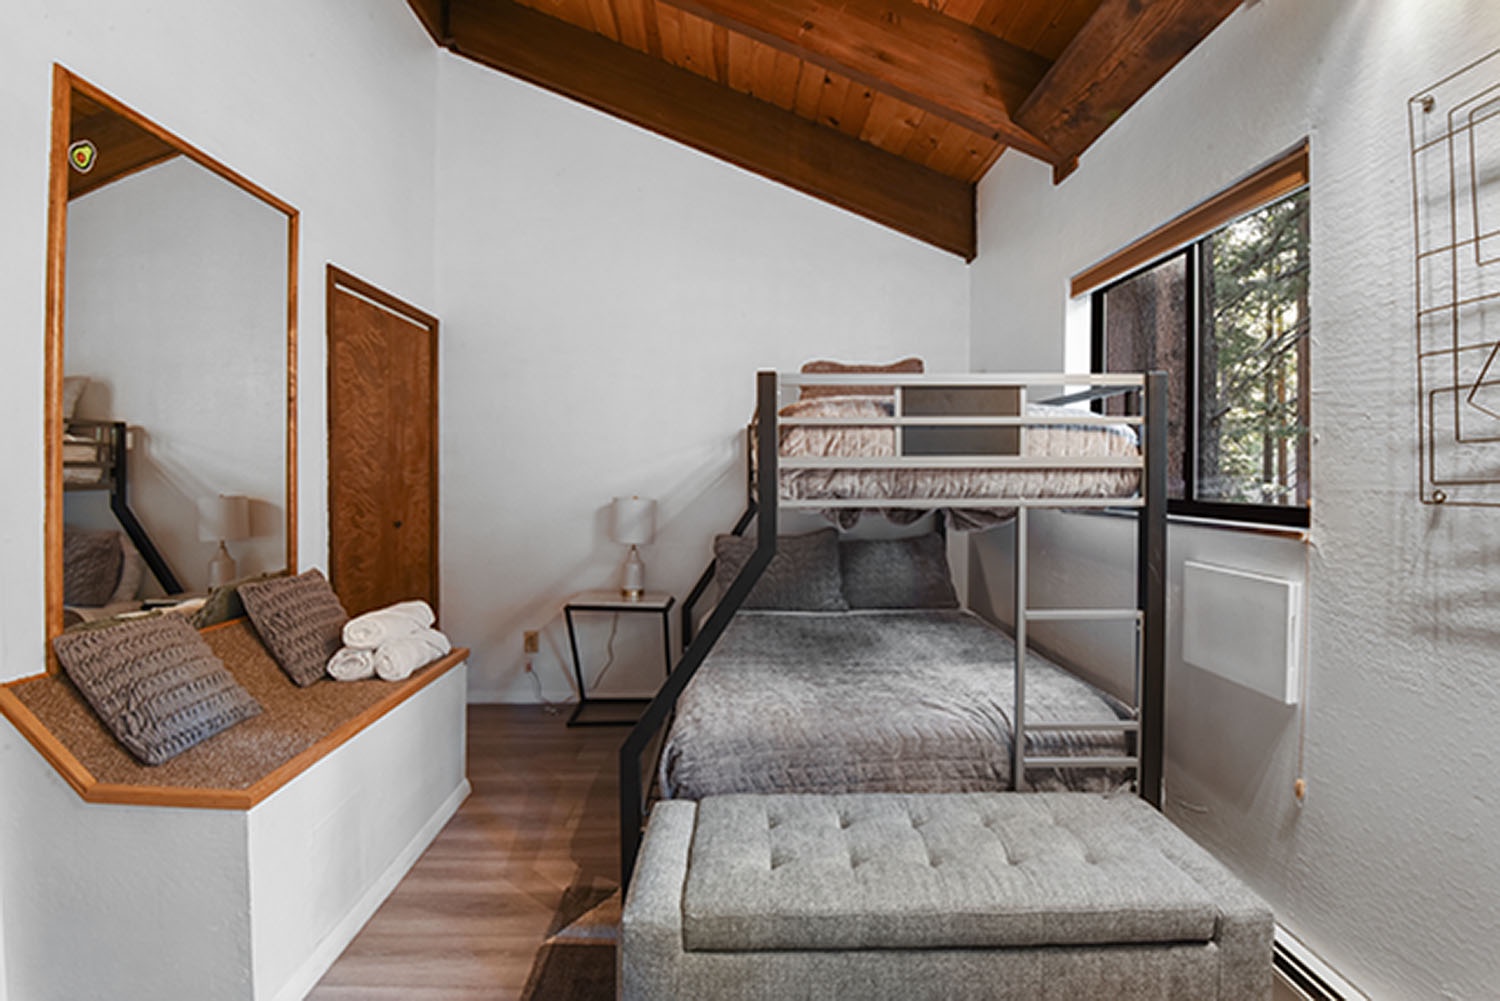 Unit #3: The 3rd floor back bedroom offers guests twin-over-full bunks & changing table